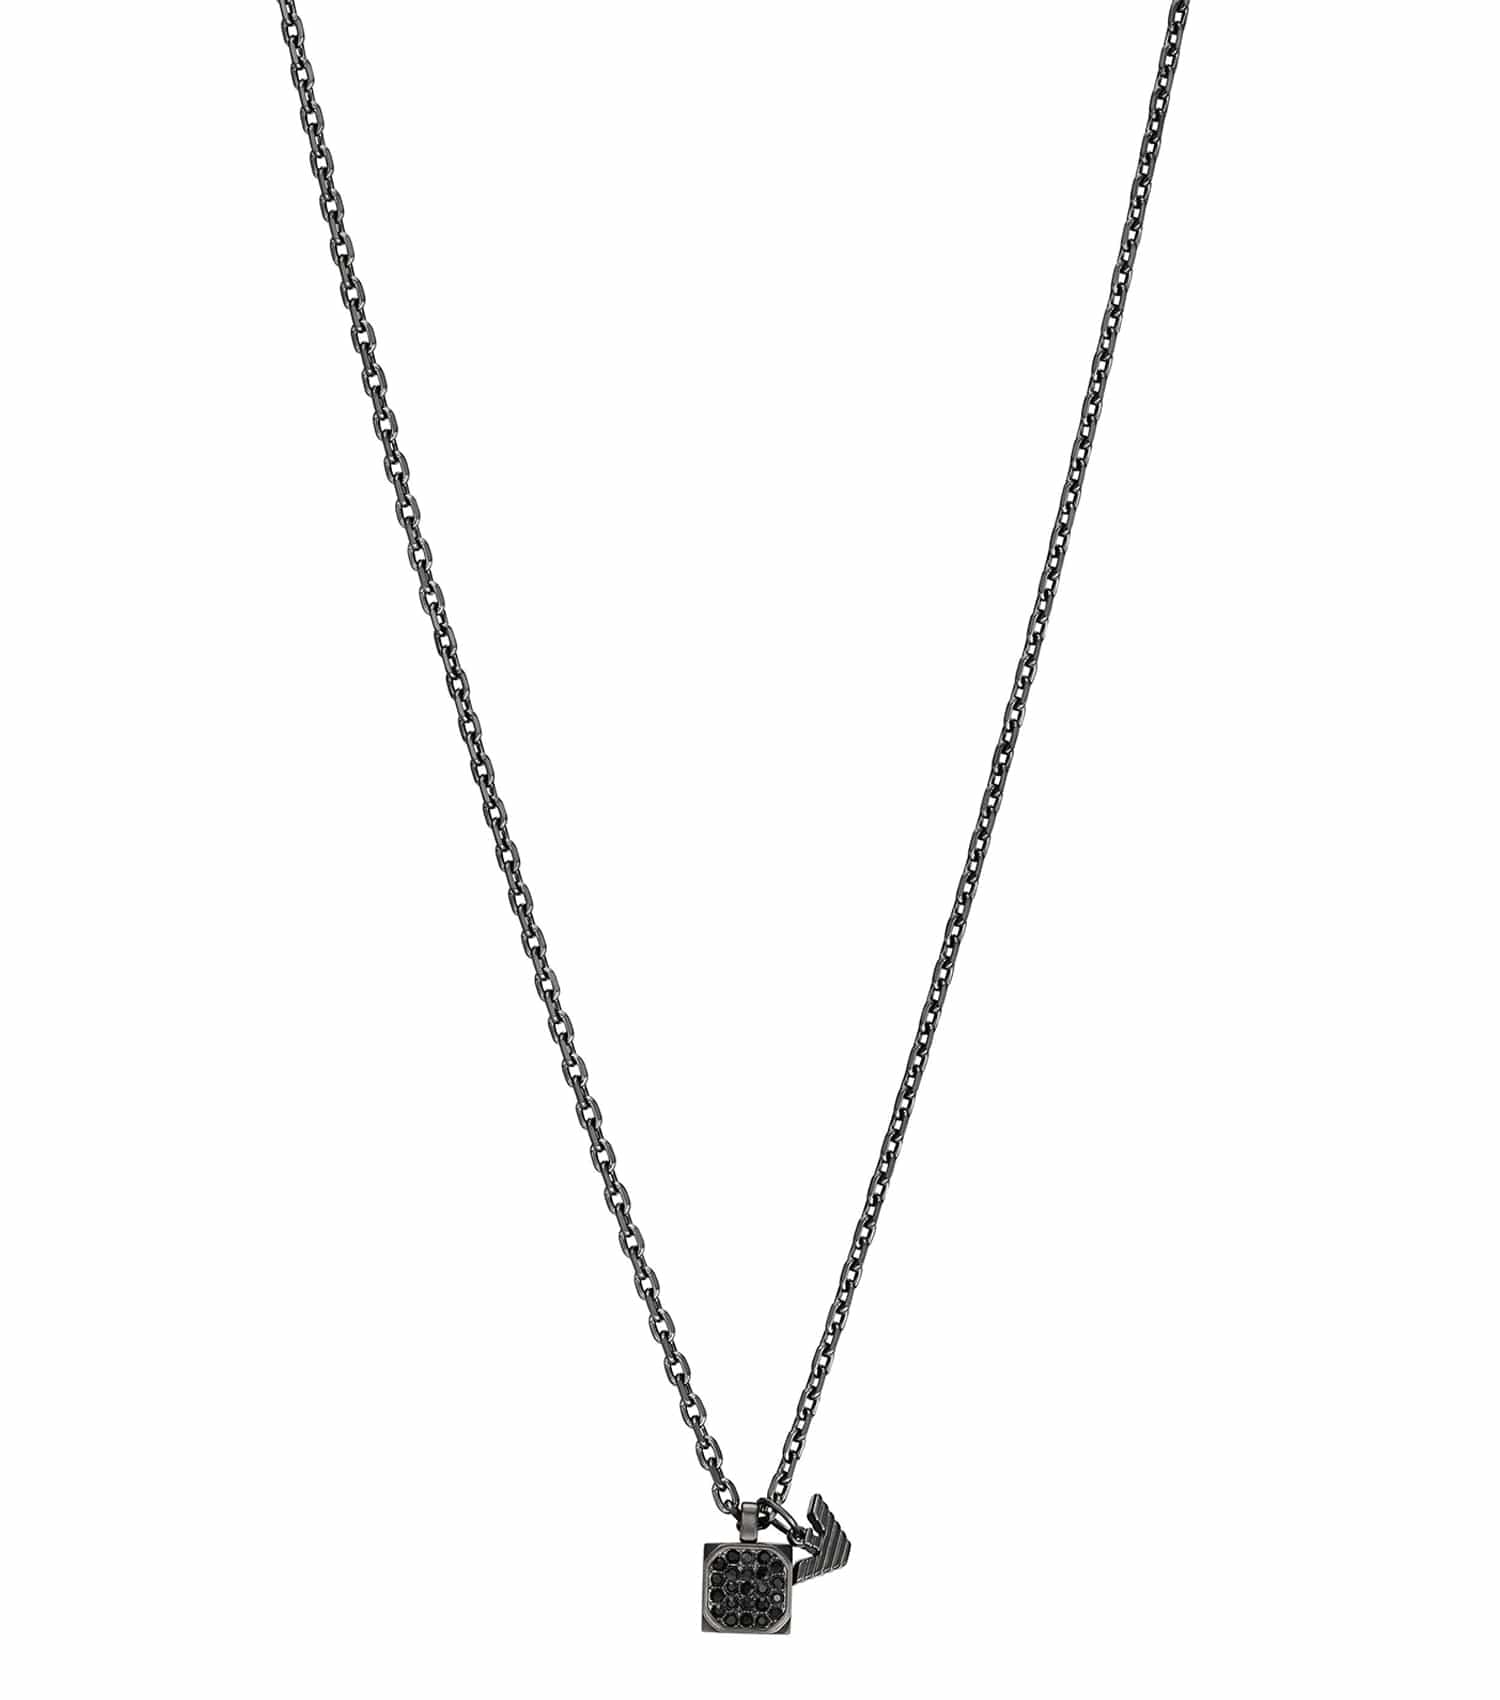 Men Couples Necklace Gunmetal Stainless Steel